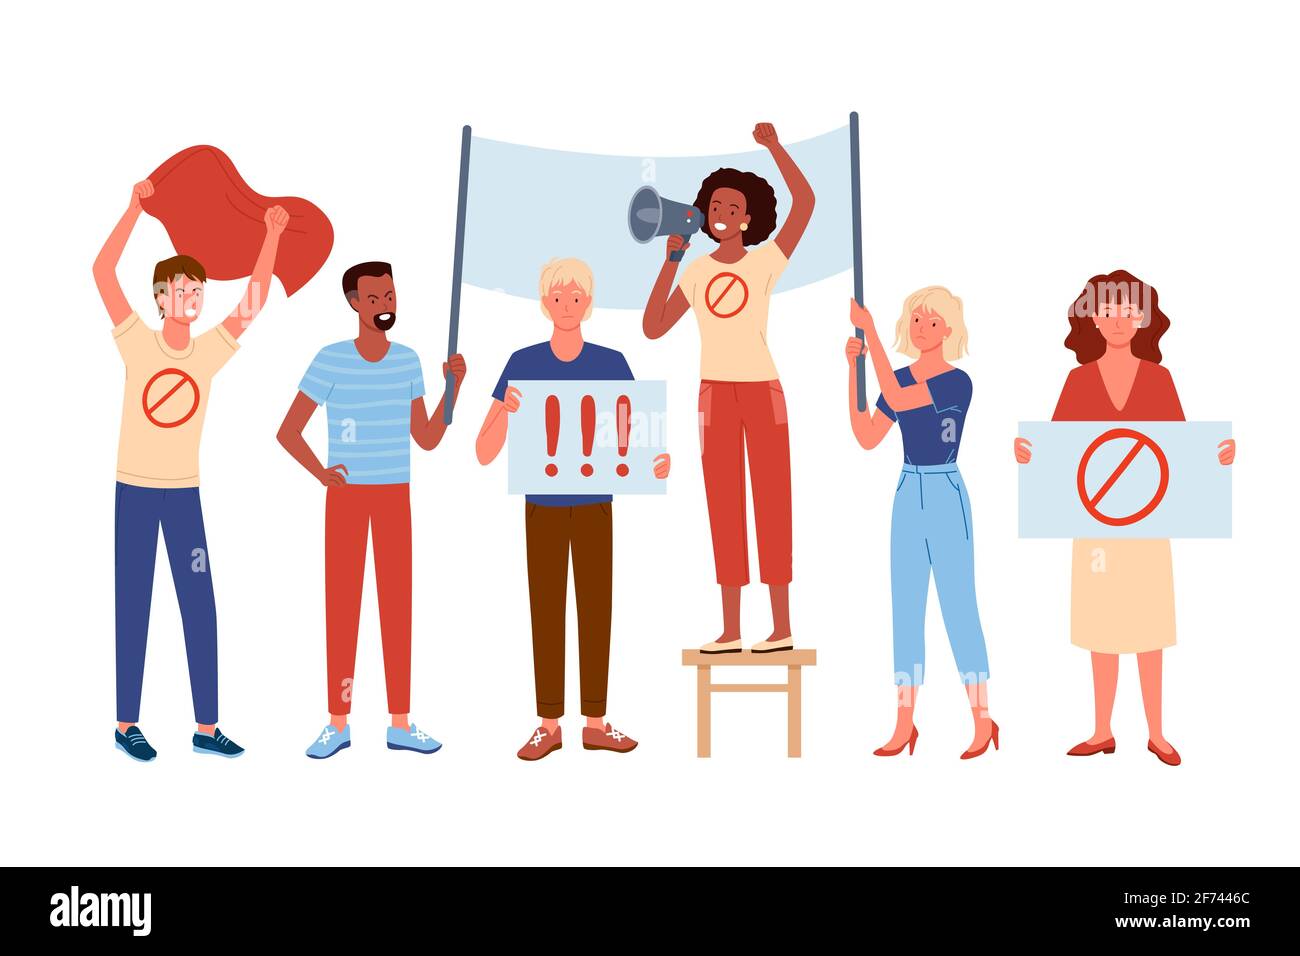 People protest, activism Cartoon man woman activist characters demonstrate, take part in protest demonstration, standing together and holding flag and Stock Vector